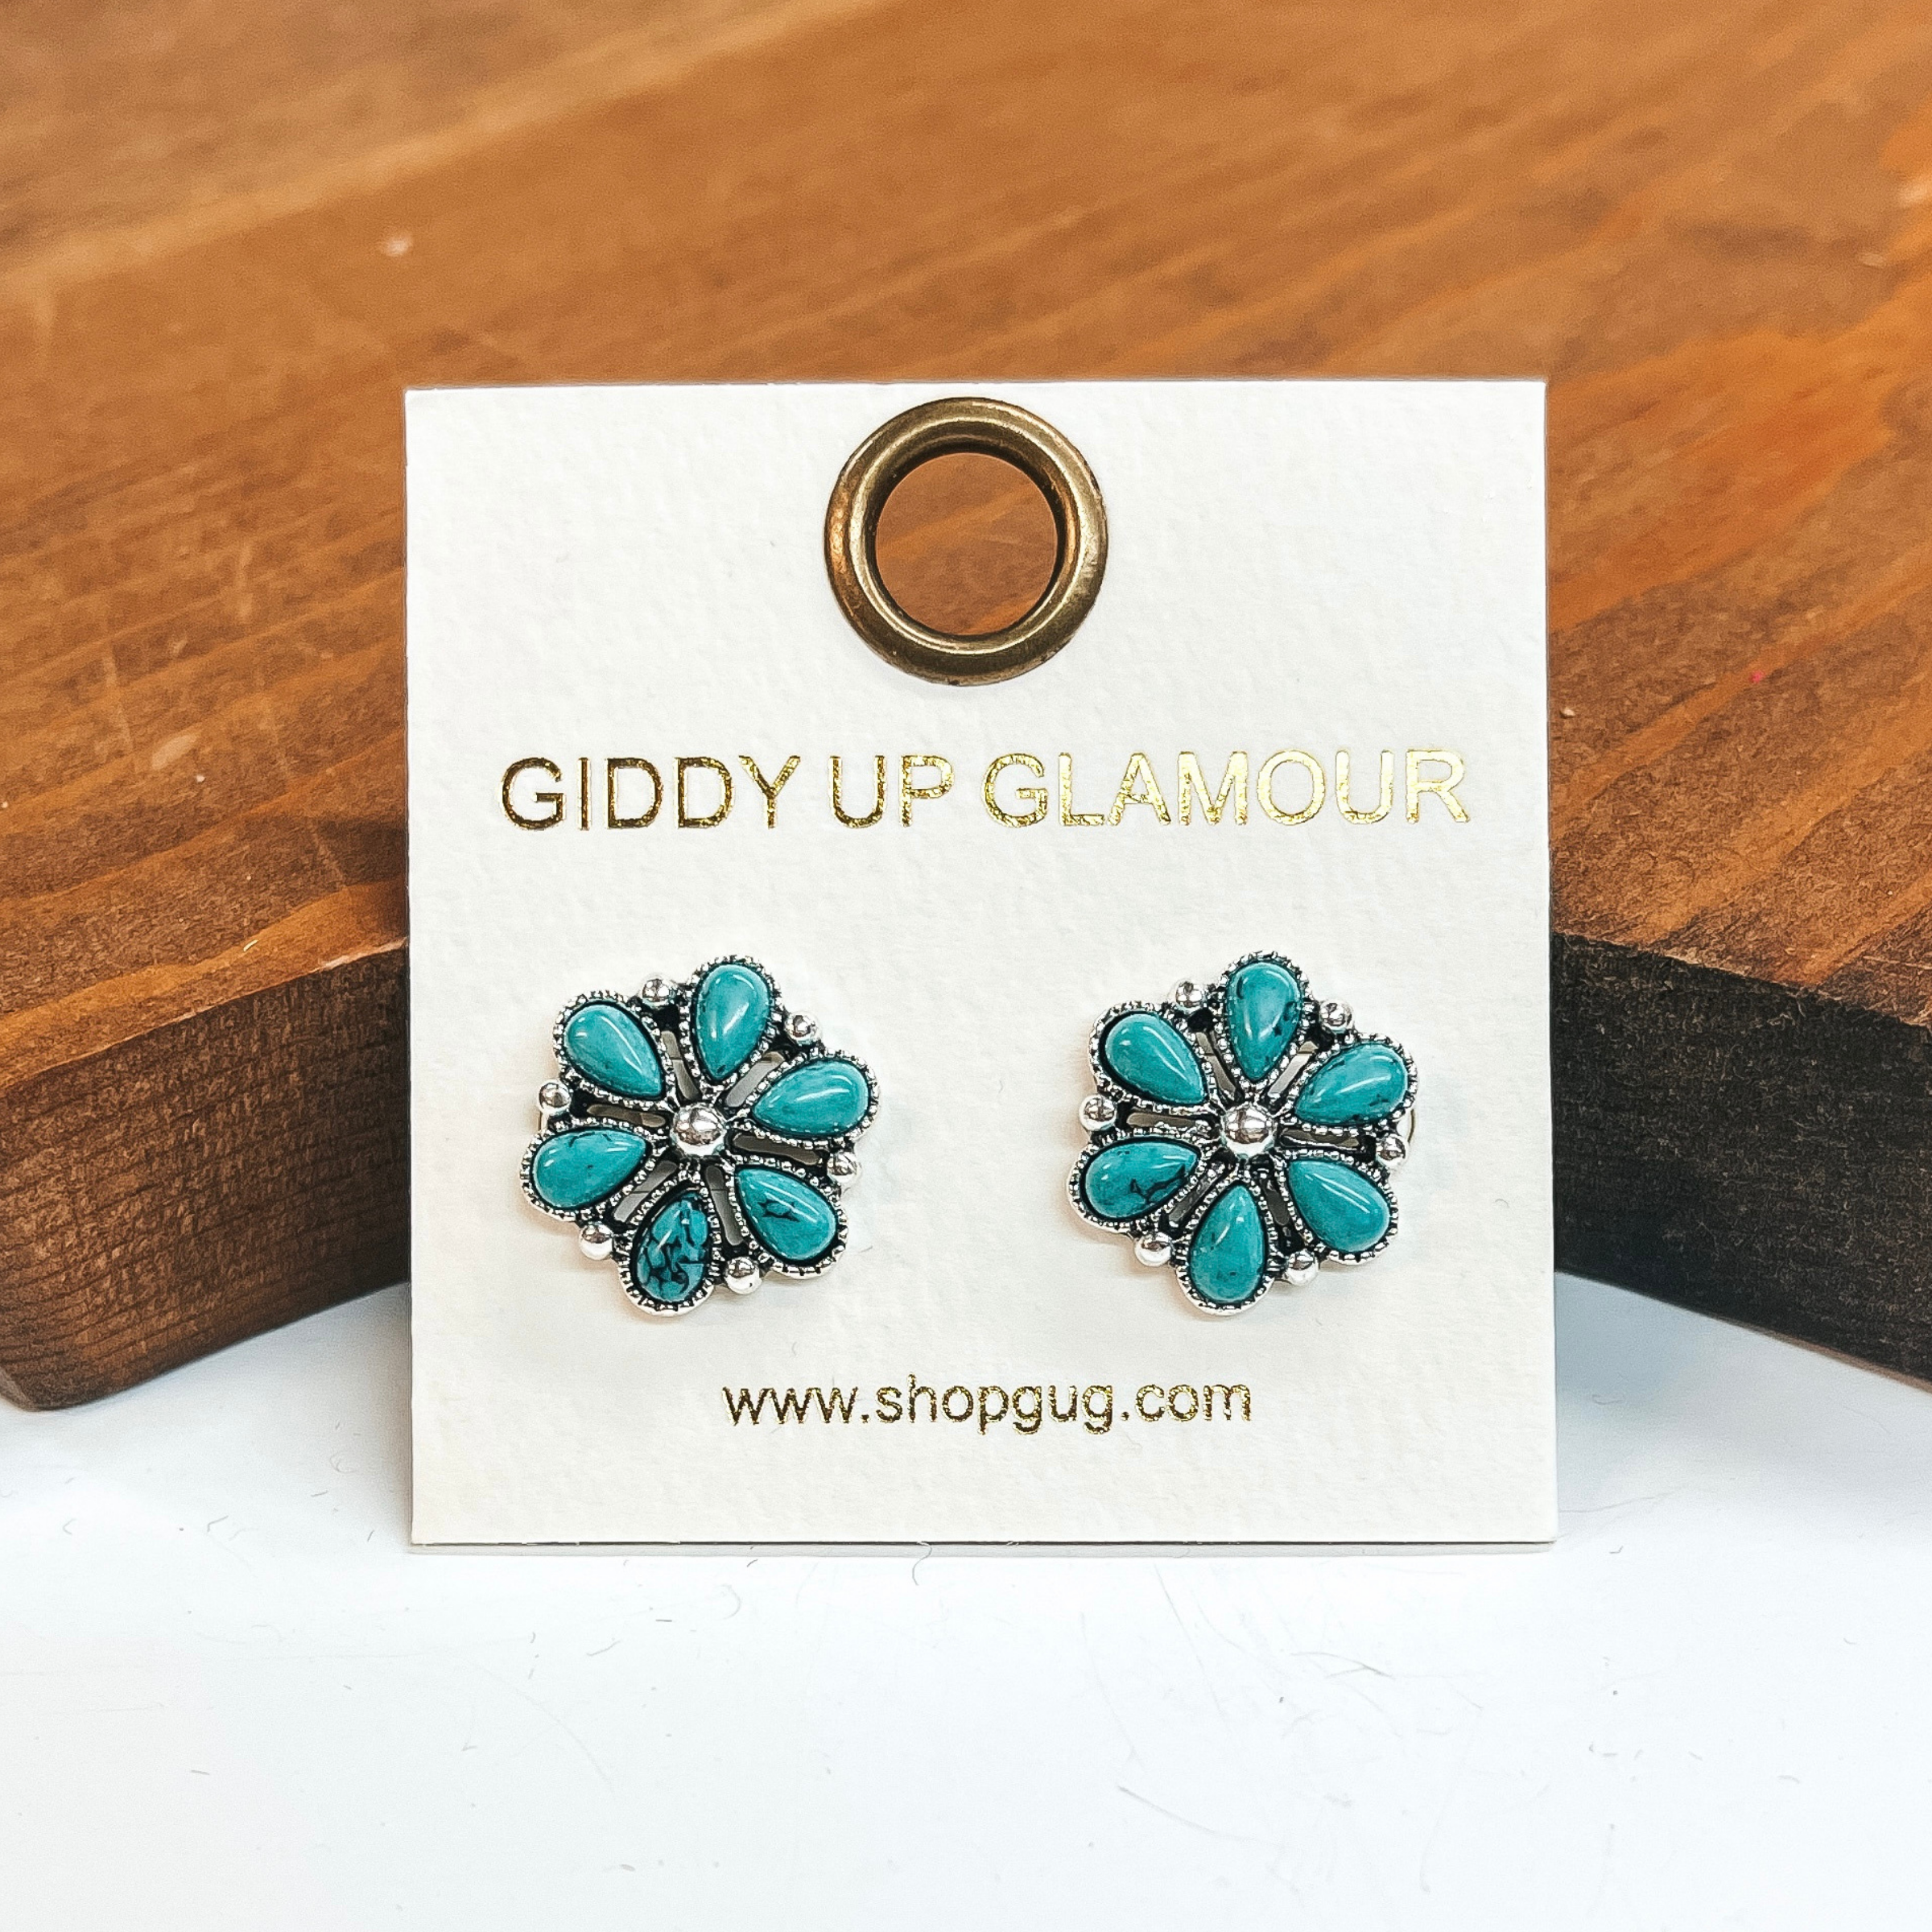 Silver flower earrings that include turquoise stones.  These earrings are taken on a white background and leaned up against a brown block.